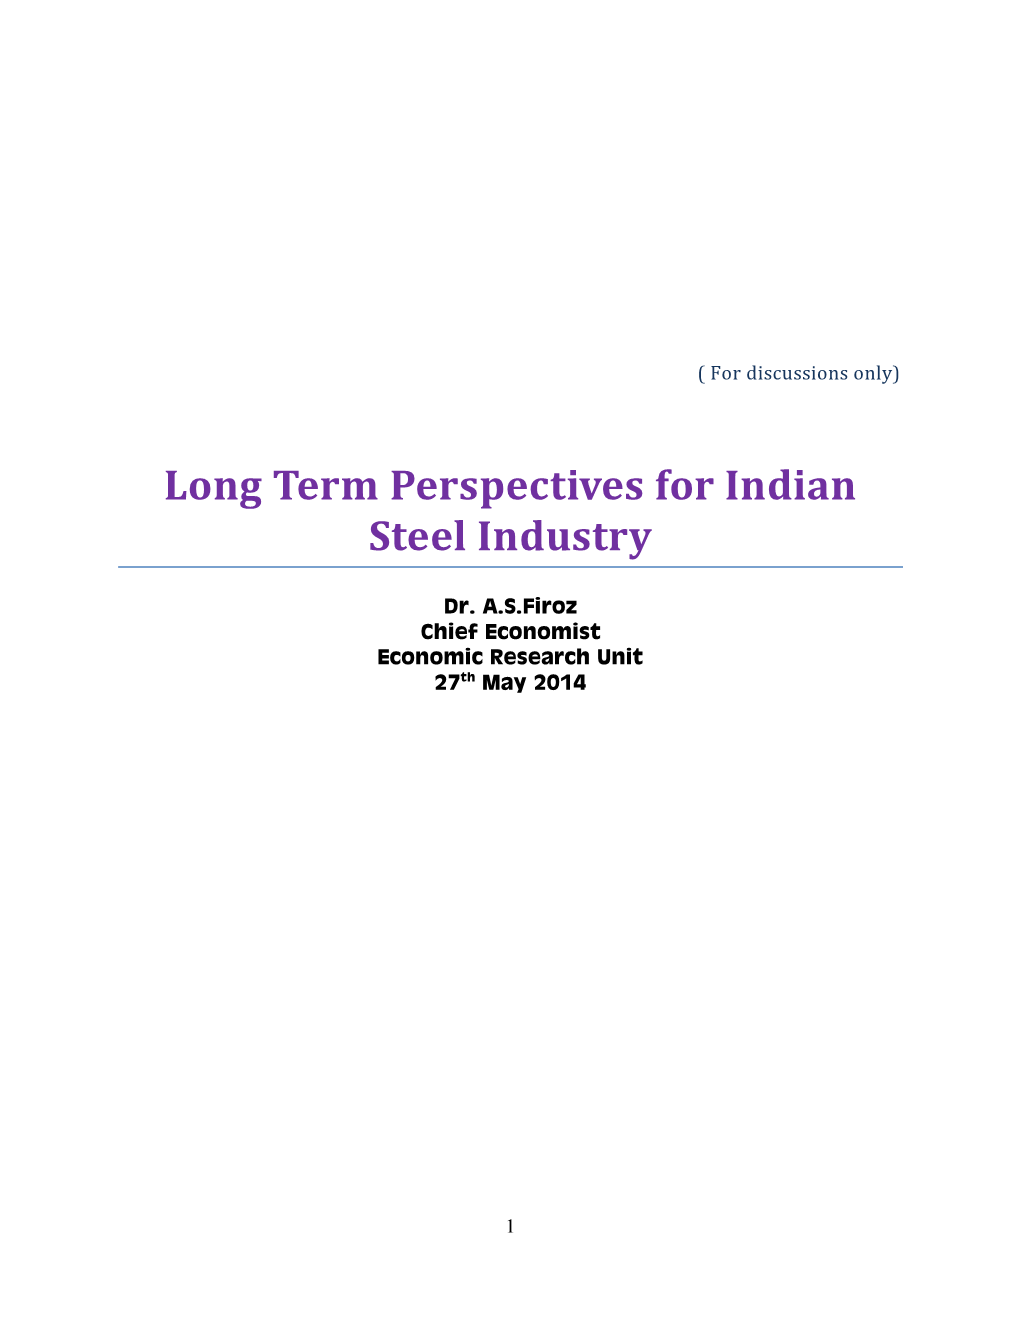 Long Term Perspectives for Indian Steel Industry